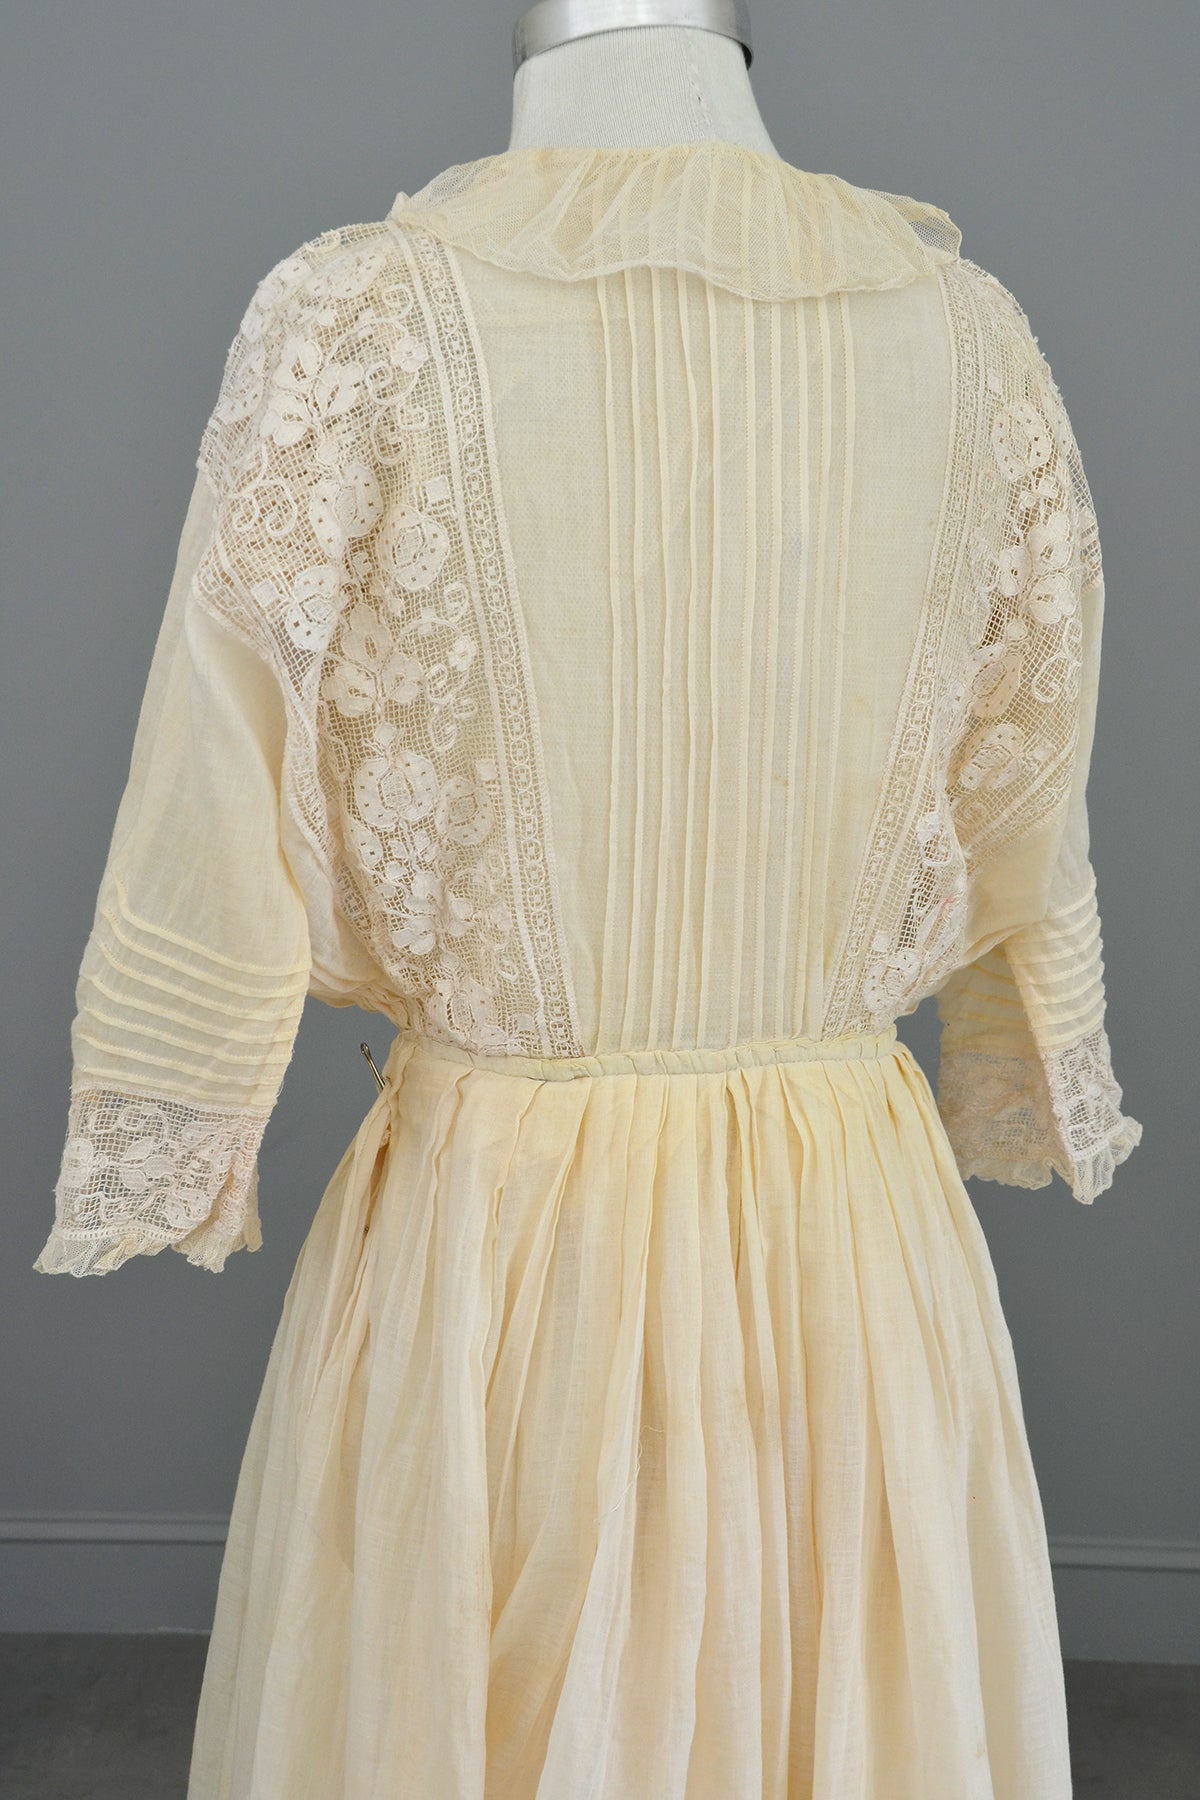 Edwardian Dress with Needlepoint Trim and Tiered Bell Skirt ...